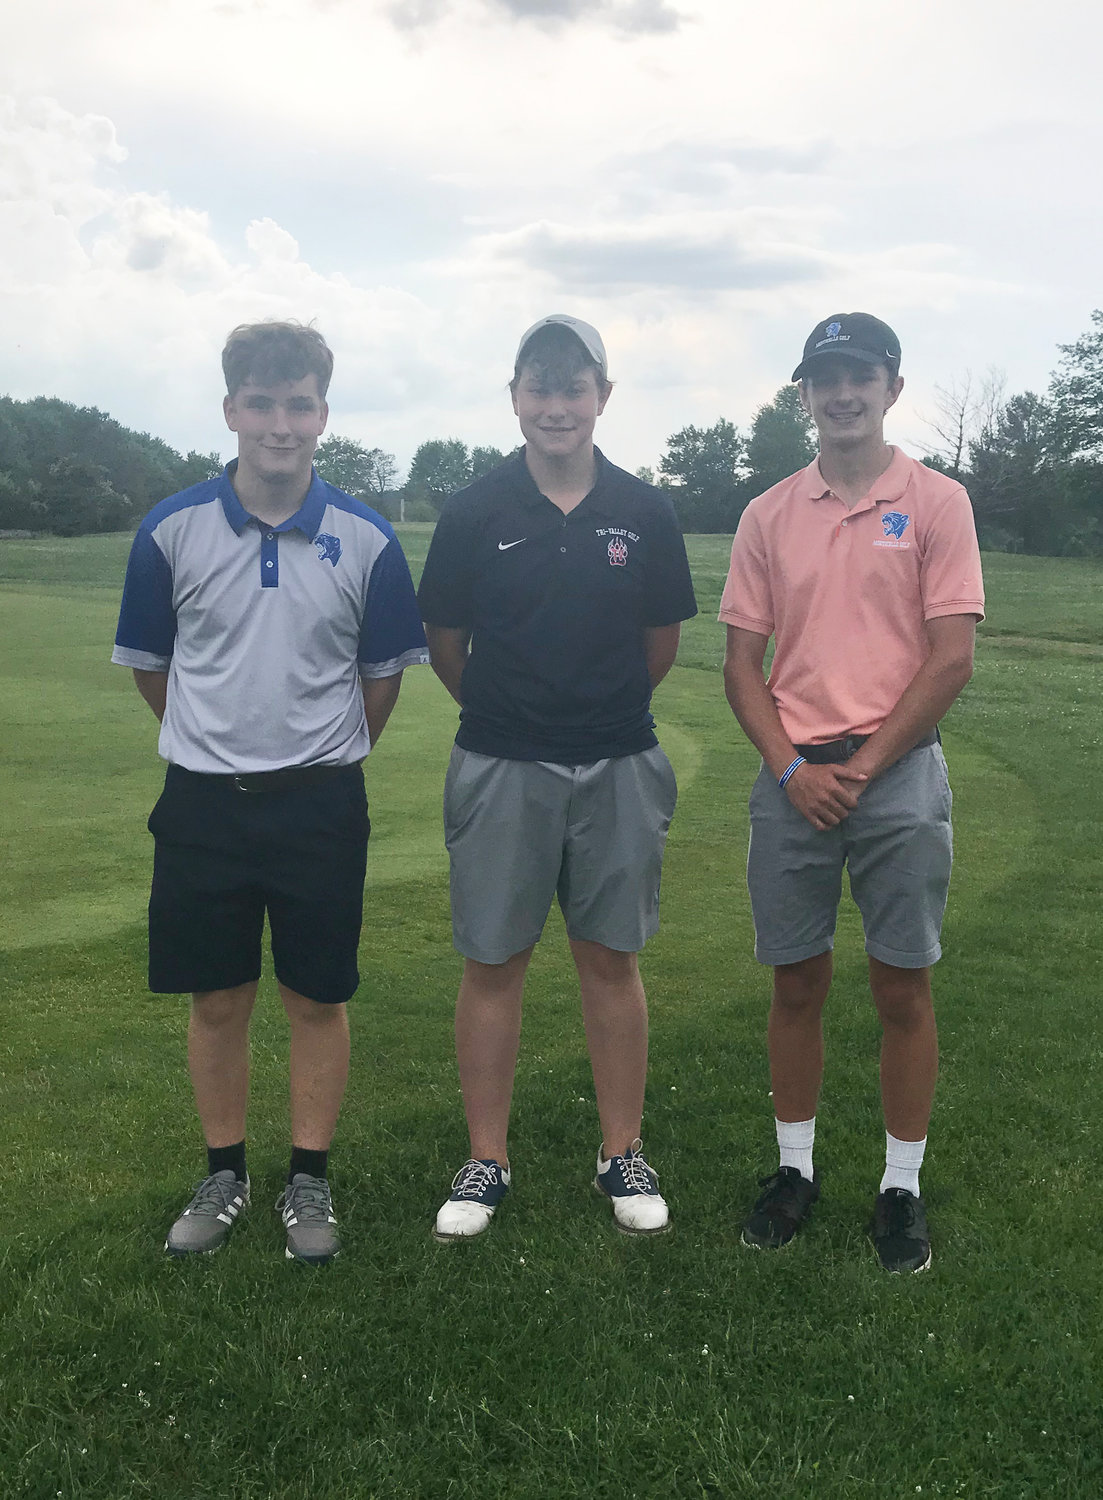 T-V’s Gavin Clarke (center) won the Sullivan County Championship at Swan Lake Golf and Country Club last week. He’s pictured with second place finisher Adam Cavello (left) and third place finisher Joseph Russo (right).